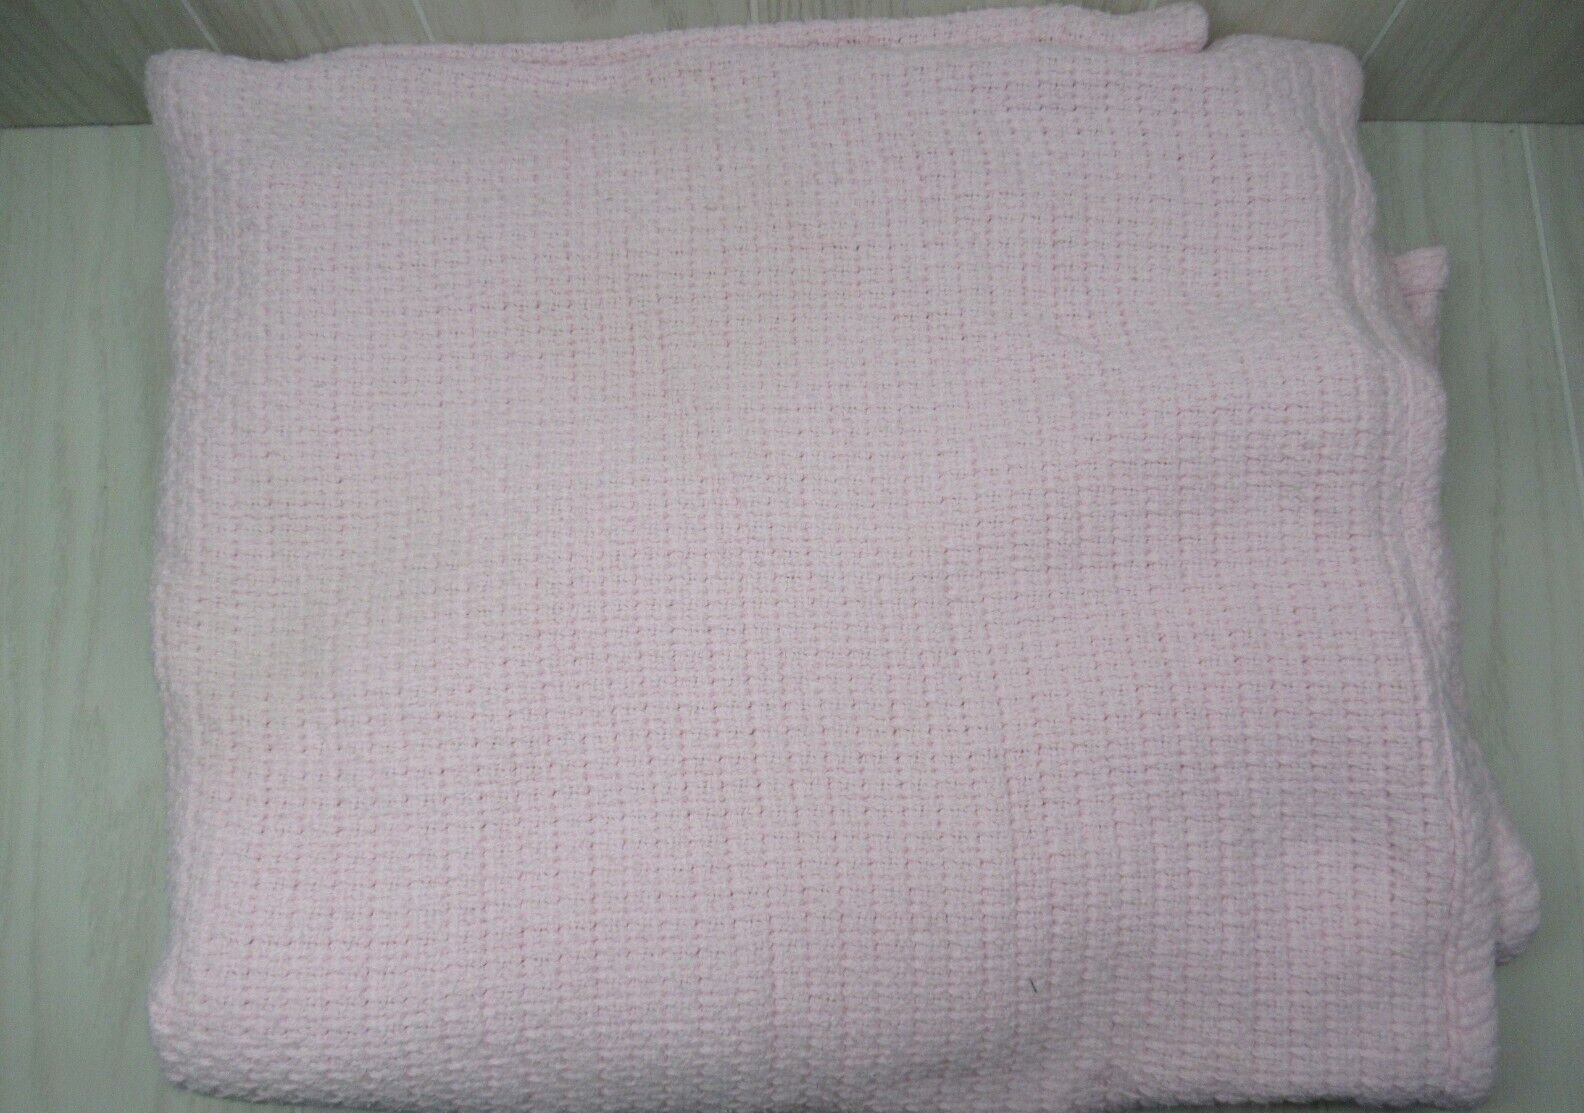 Pottery Barn kids pink thermal woven cotton blanket USED READ 67x78" - $49.49